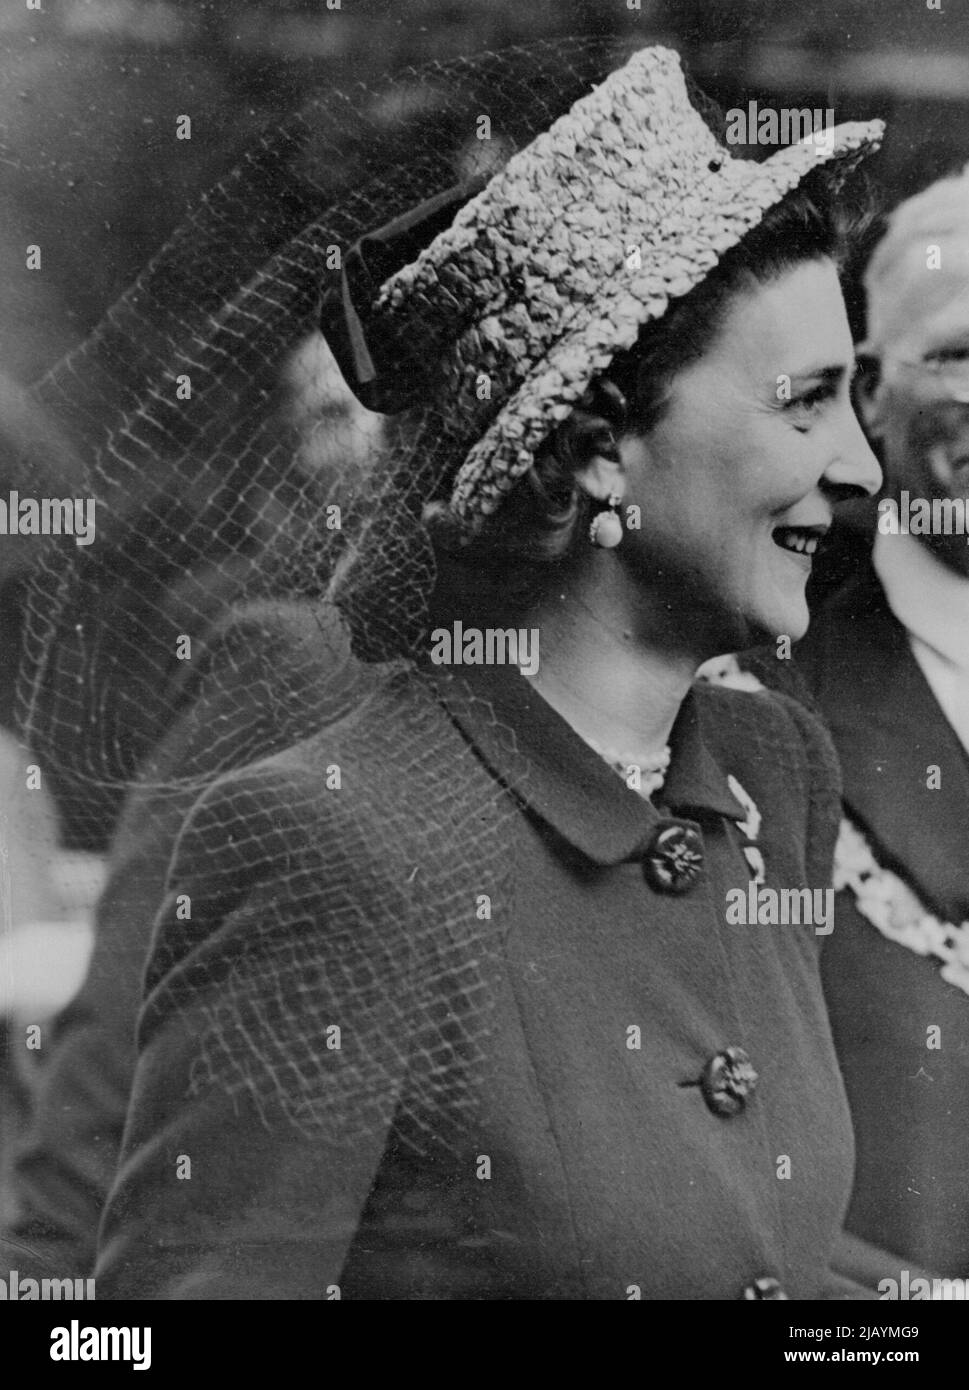 The Duchess of Kent's New Hat Fashion - A smiling close up picture of the Duchess and her charming hat fashion as she left the Cathedral after the service. The Duchess of Kent were a striking hat of natural straw decorated with a blue veil, when she visited Southwark to attend the service at Southwark Cathedral which inaugurated the Shakespeare Festival in the Borough. May 20, 1946. Stock Photo